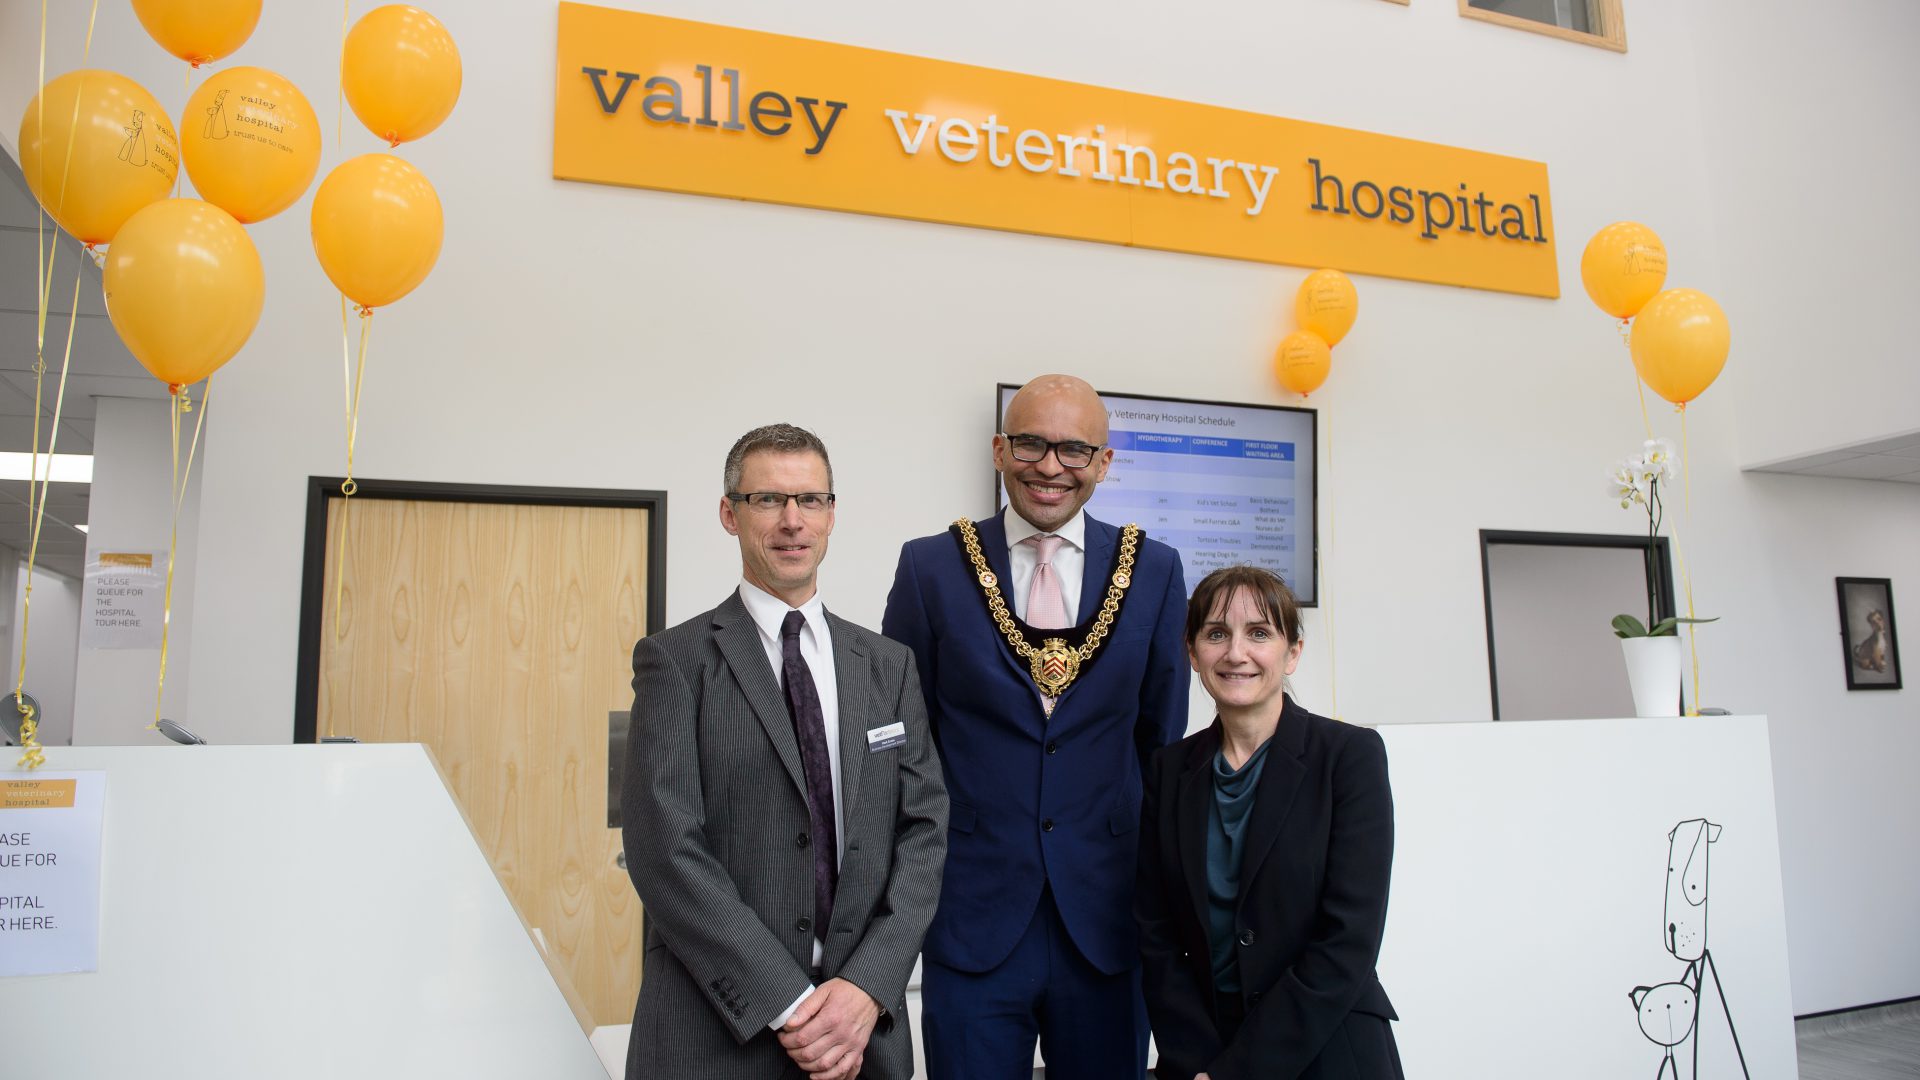 New £2 million Valley Veterinary Hospital opens in Cardiff